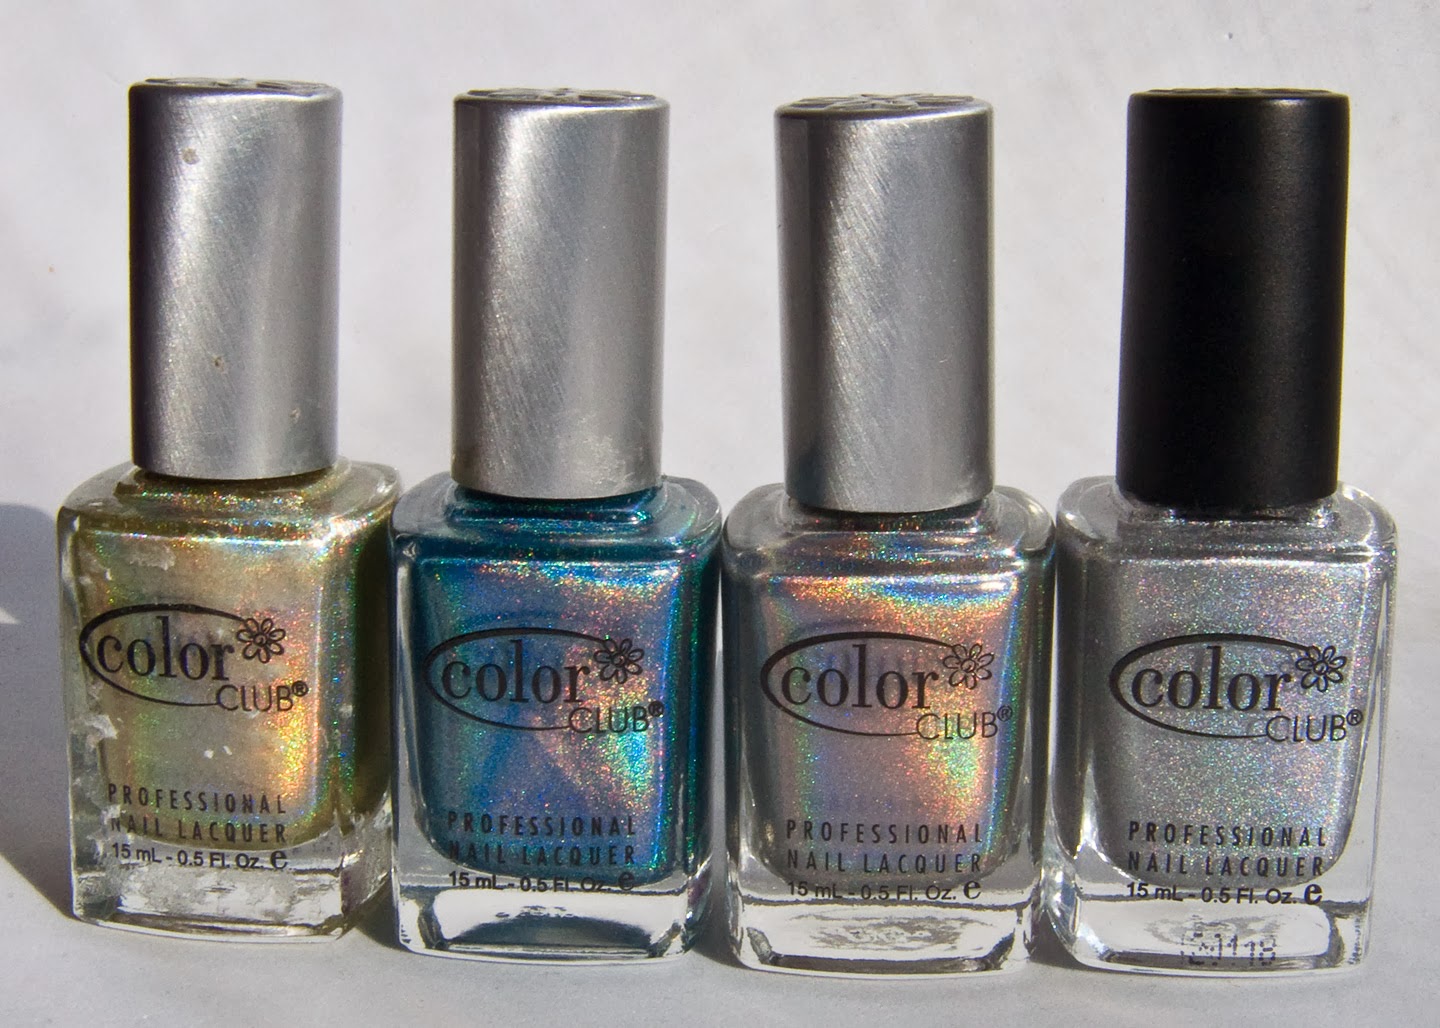 Color Club Holographic Nail Polish Swatches - wide 4